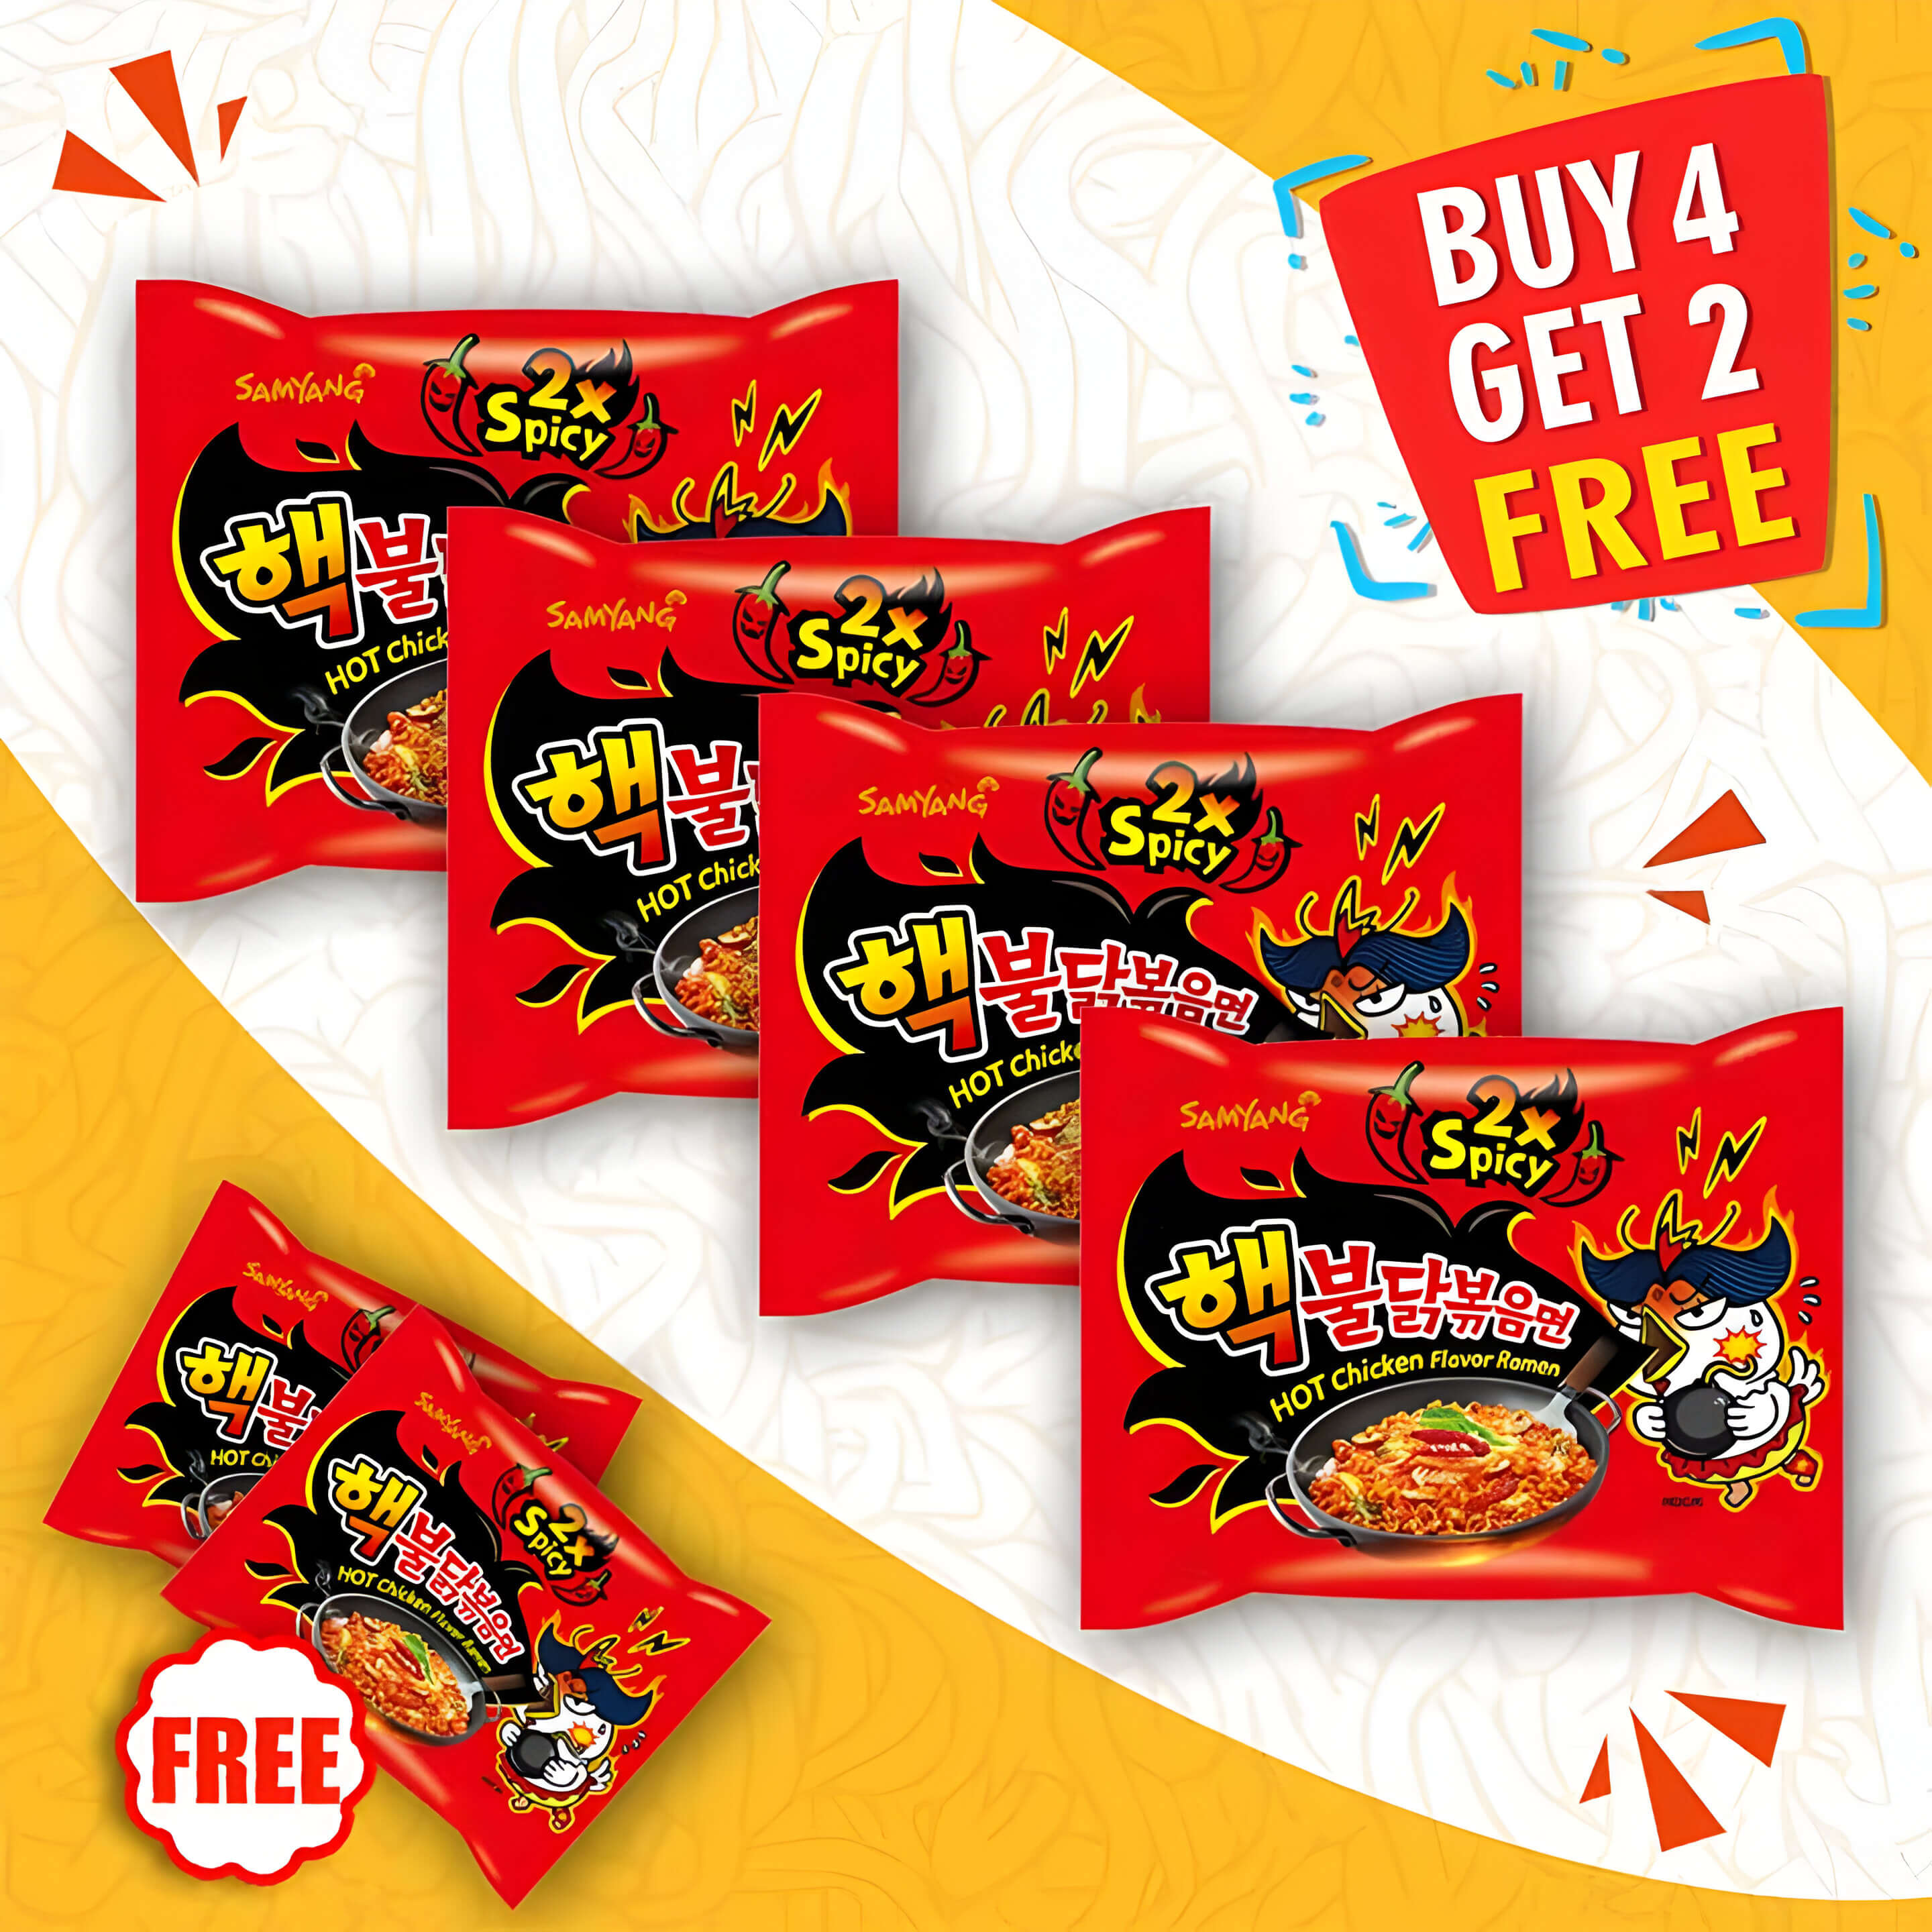 1694586990_Samyang-Noodles-2X-Spicy-Pouch-Buy-2-Get-1-Free-2 (1) (1)